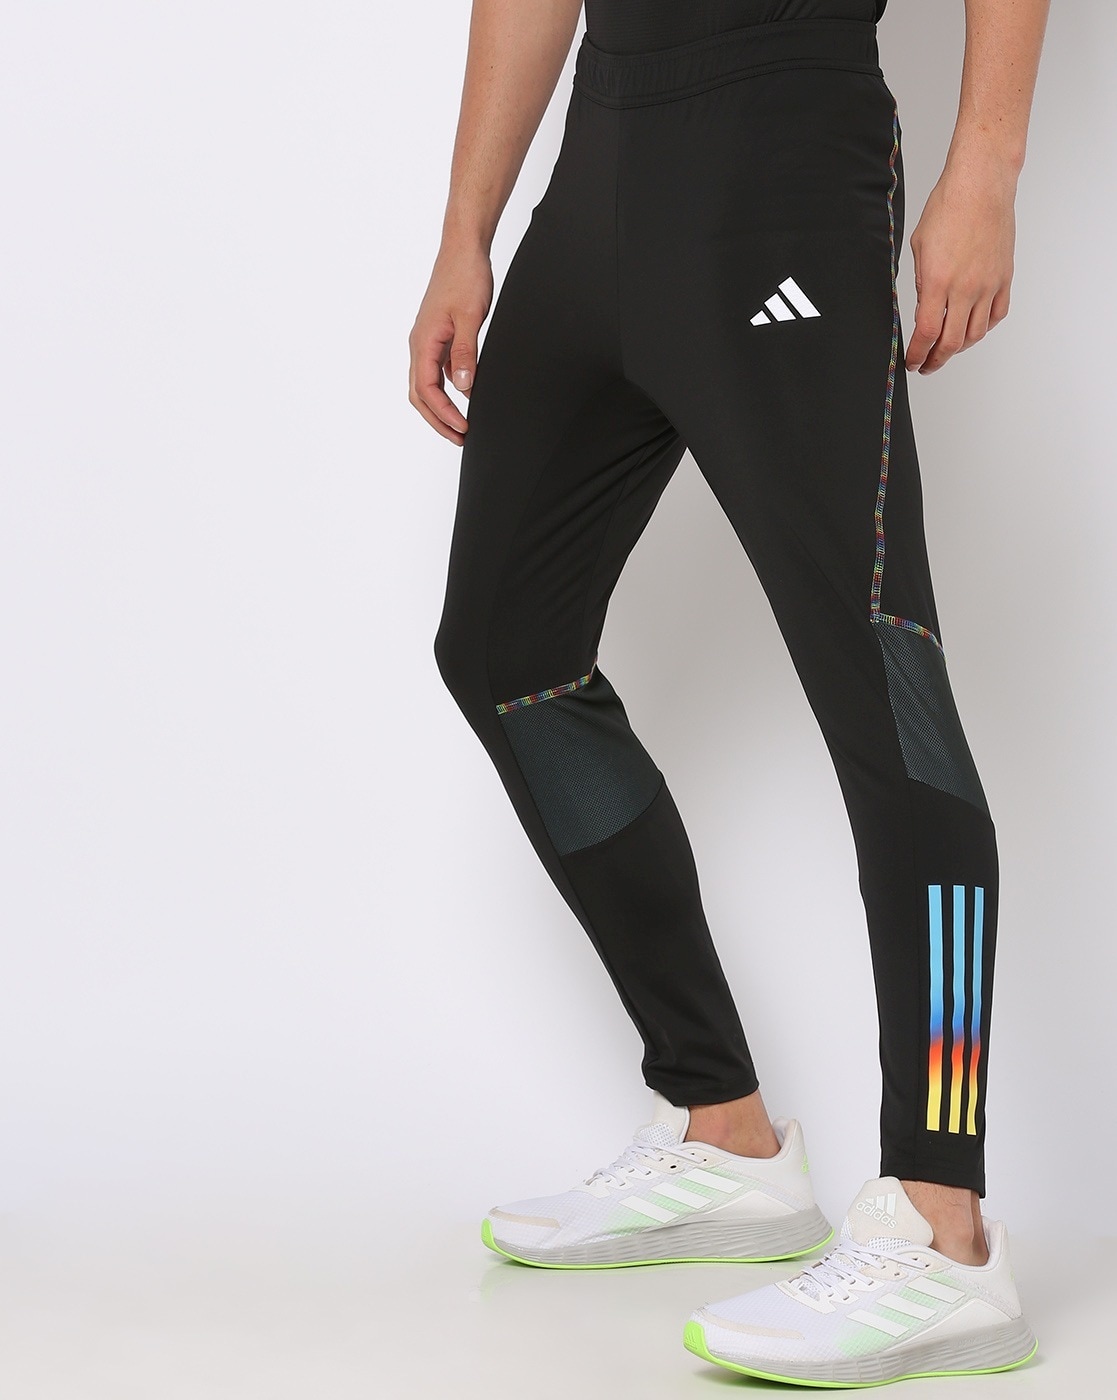 Adidas Black & White TAP Track Pants - Women & Women's Tall | Best Price  and Reviews | Zulily